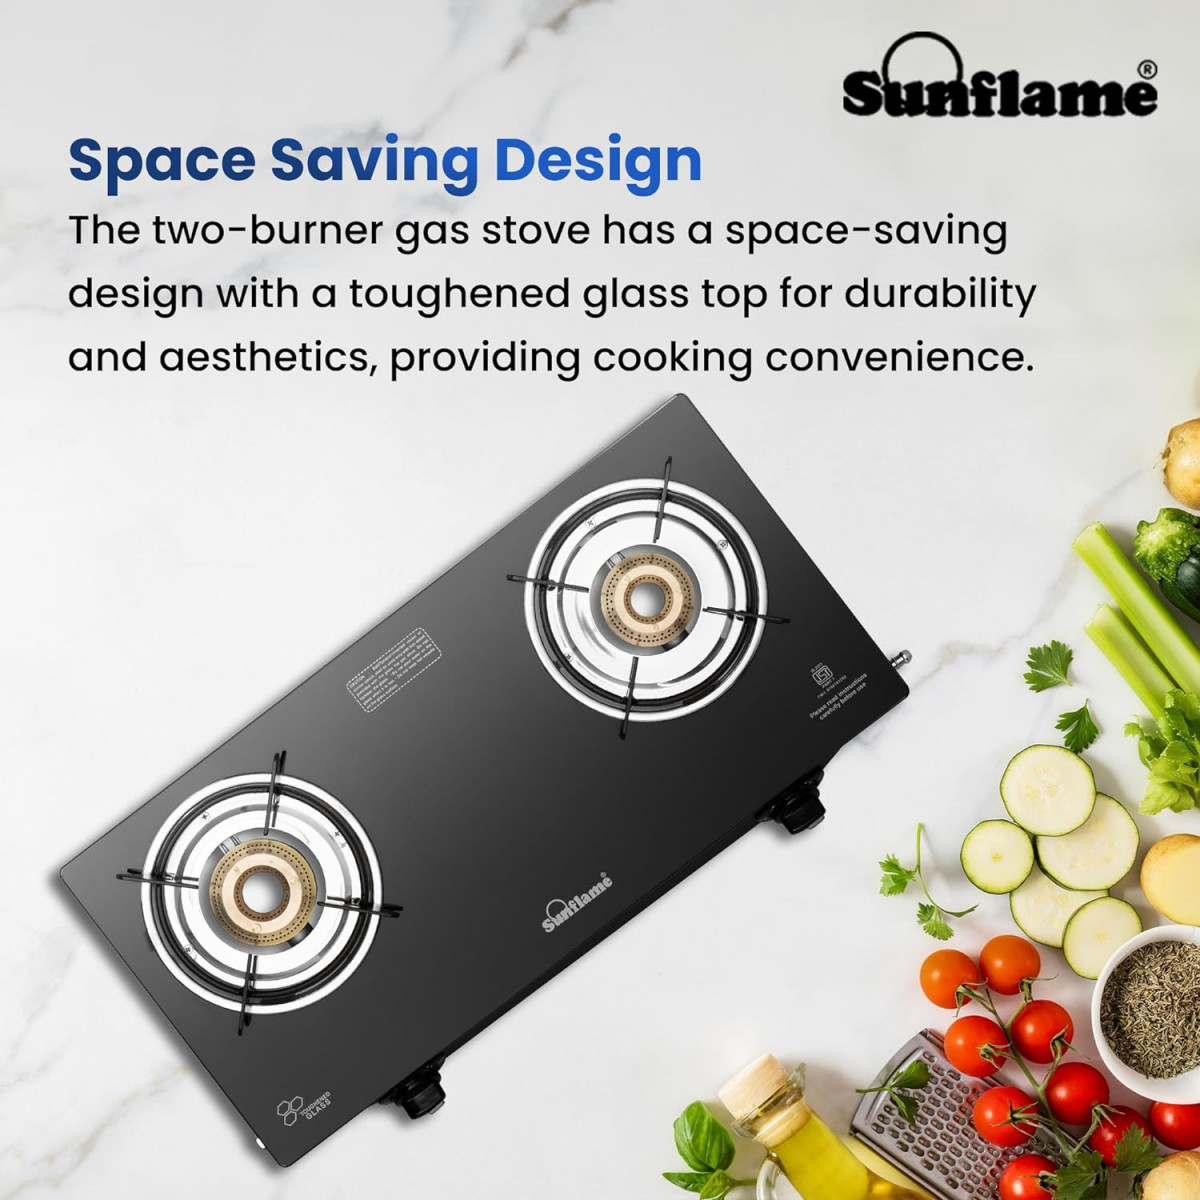 Sunflame Maleo 2 Burner Gas Stove  Space Saving Design  Complimentary Lighter  1 Medium  1 Small Brass Burners  2 Years Product Coverage  Toughened Glass Top  Pan India Presence